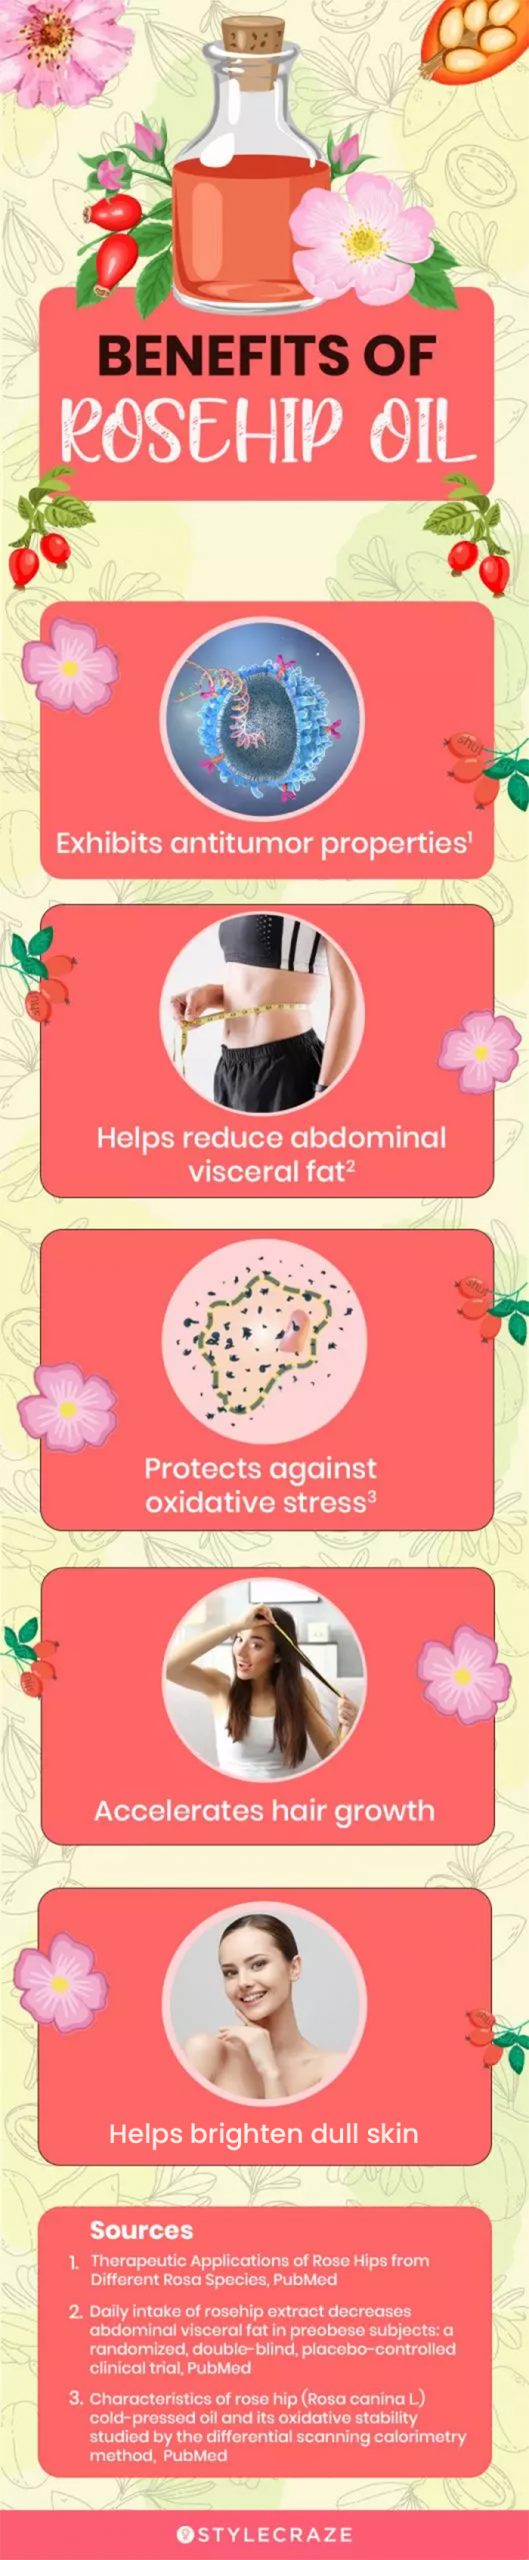 benefits of rosehip oil (infographic)